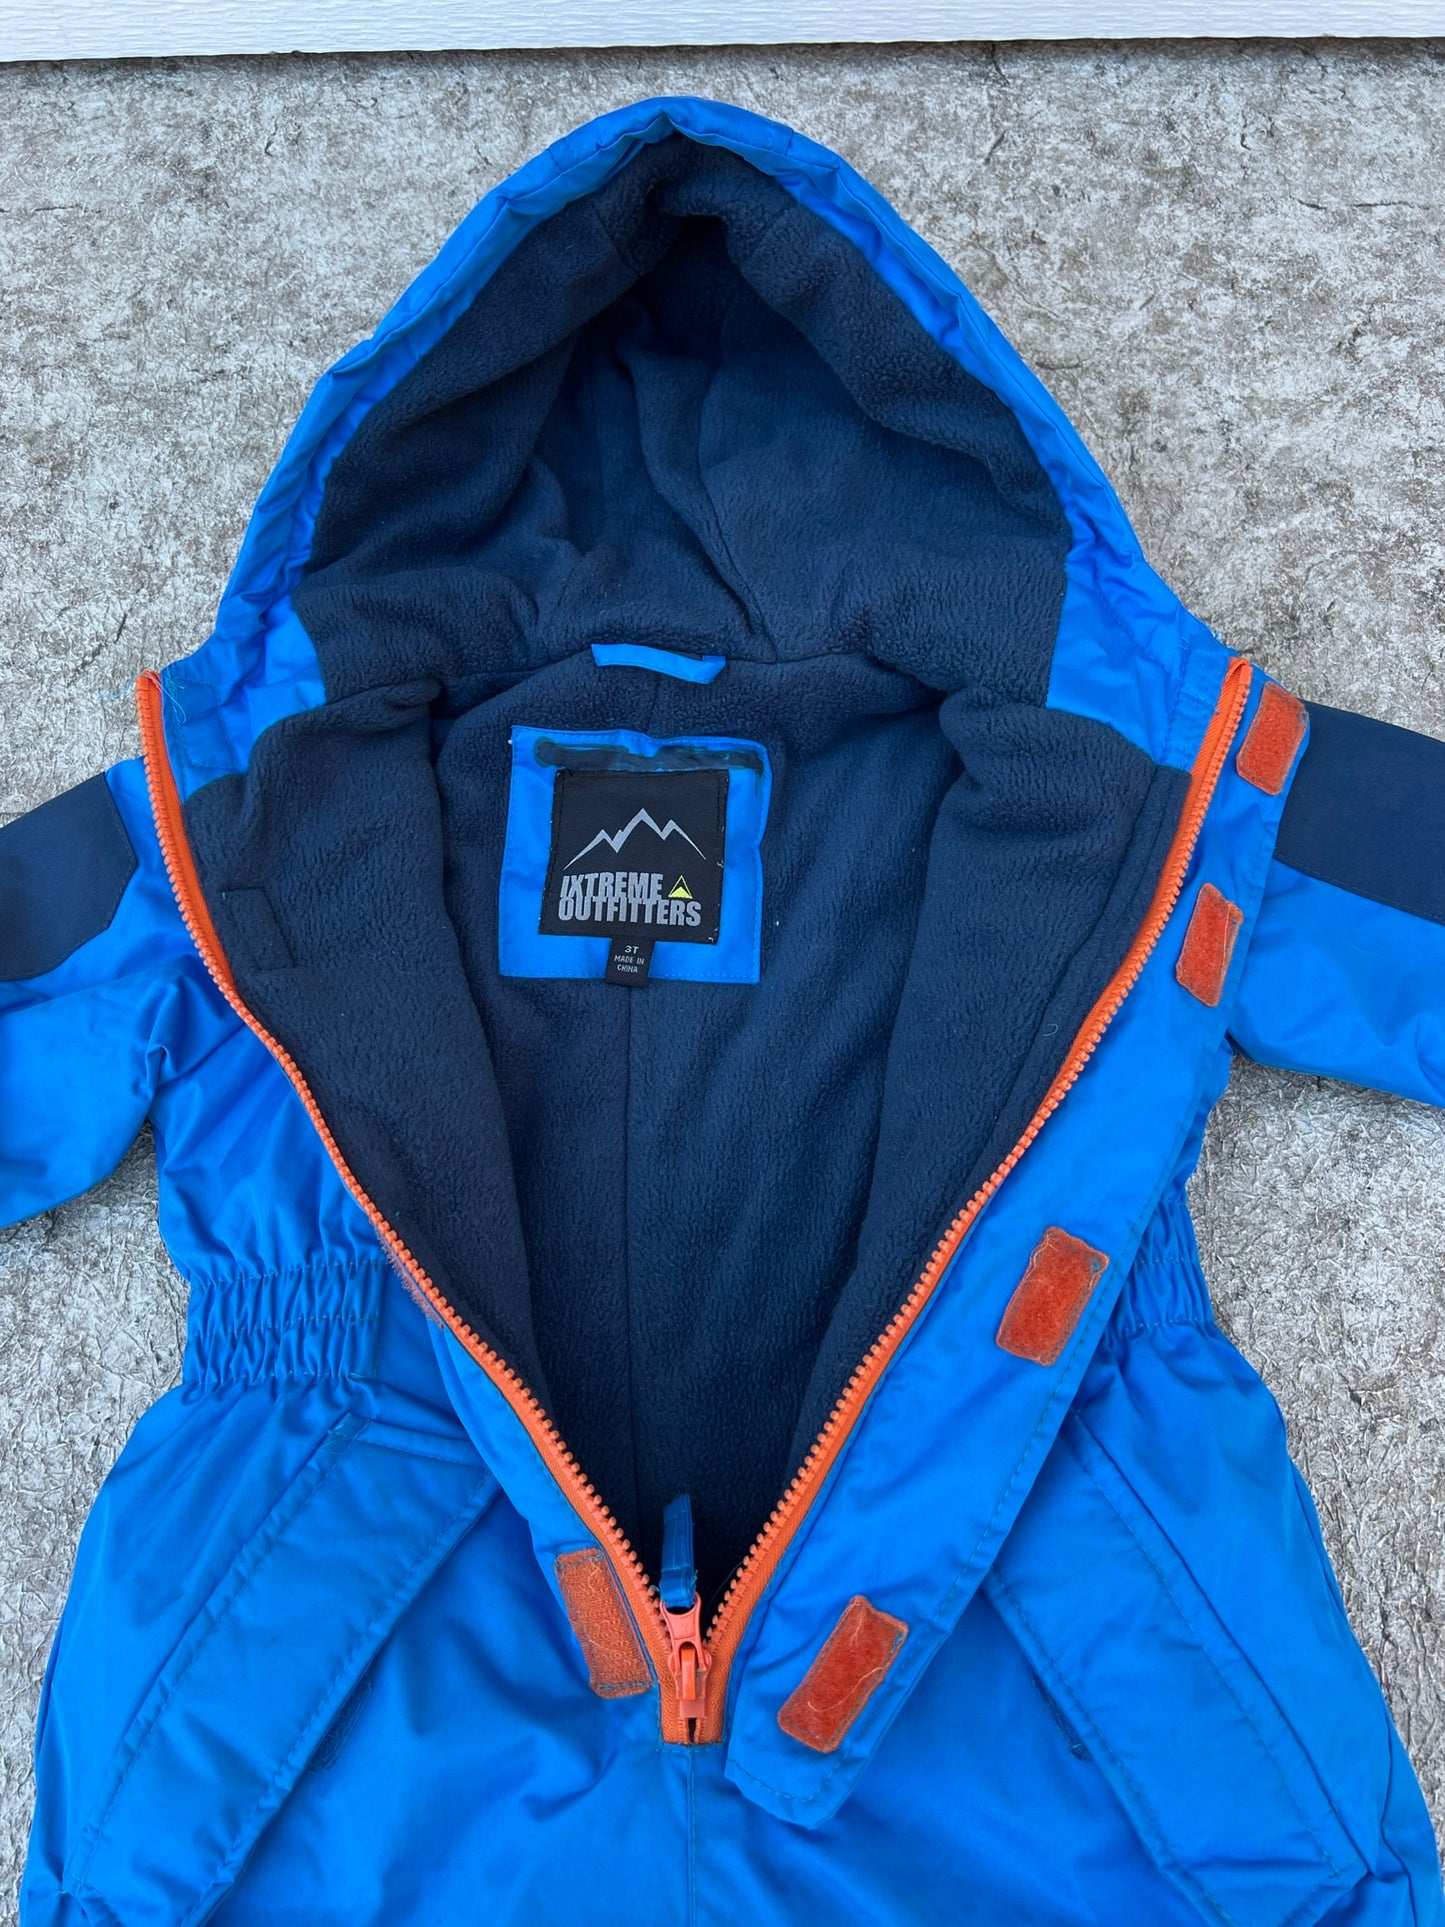 Snowsuit Child Size 3 T Xtreame Blue and Tangerine Fleece Lined As New